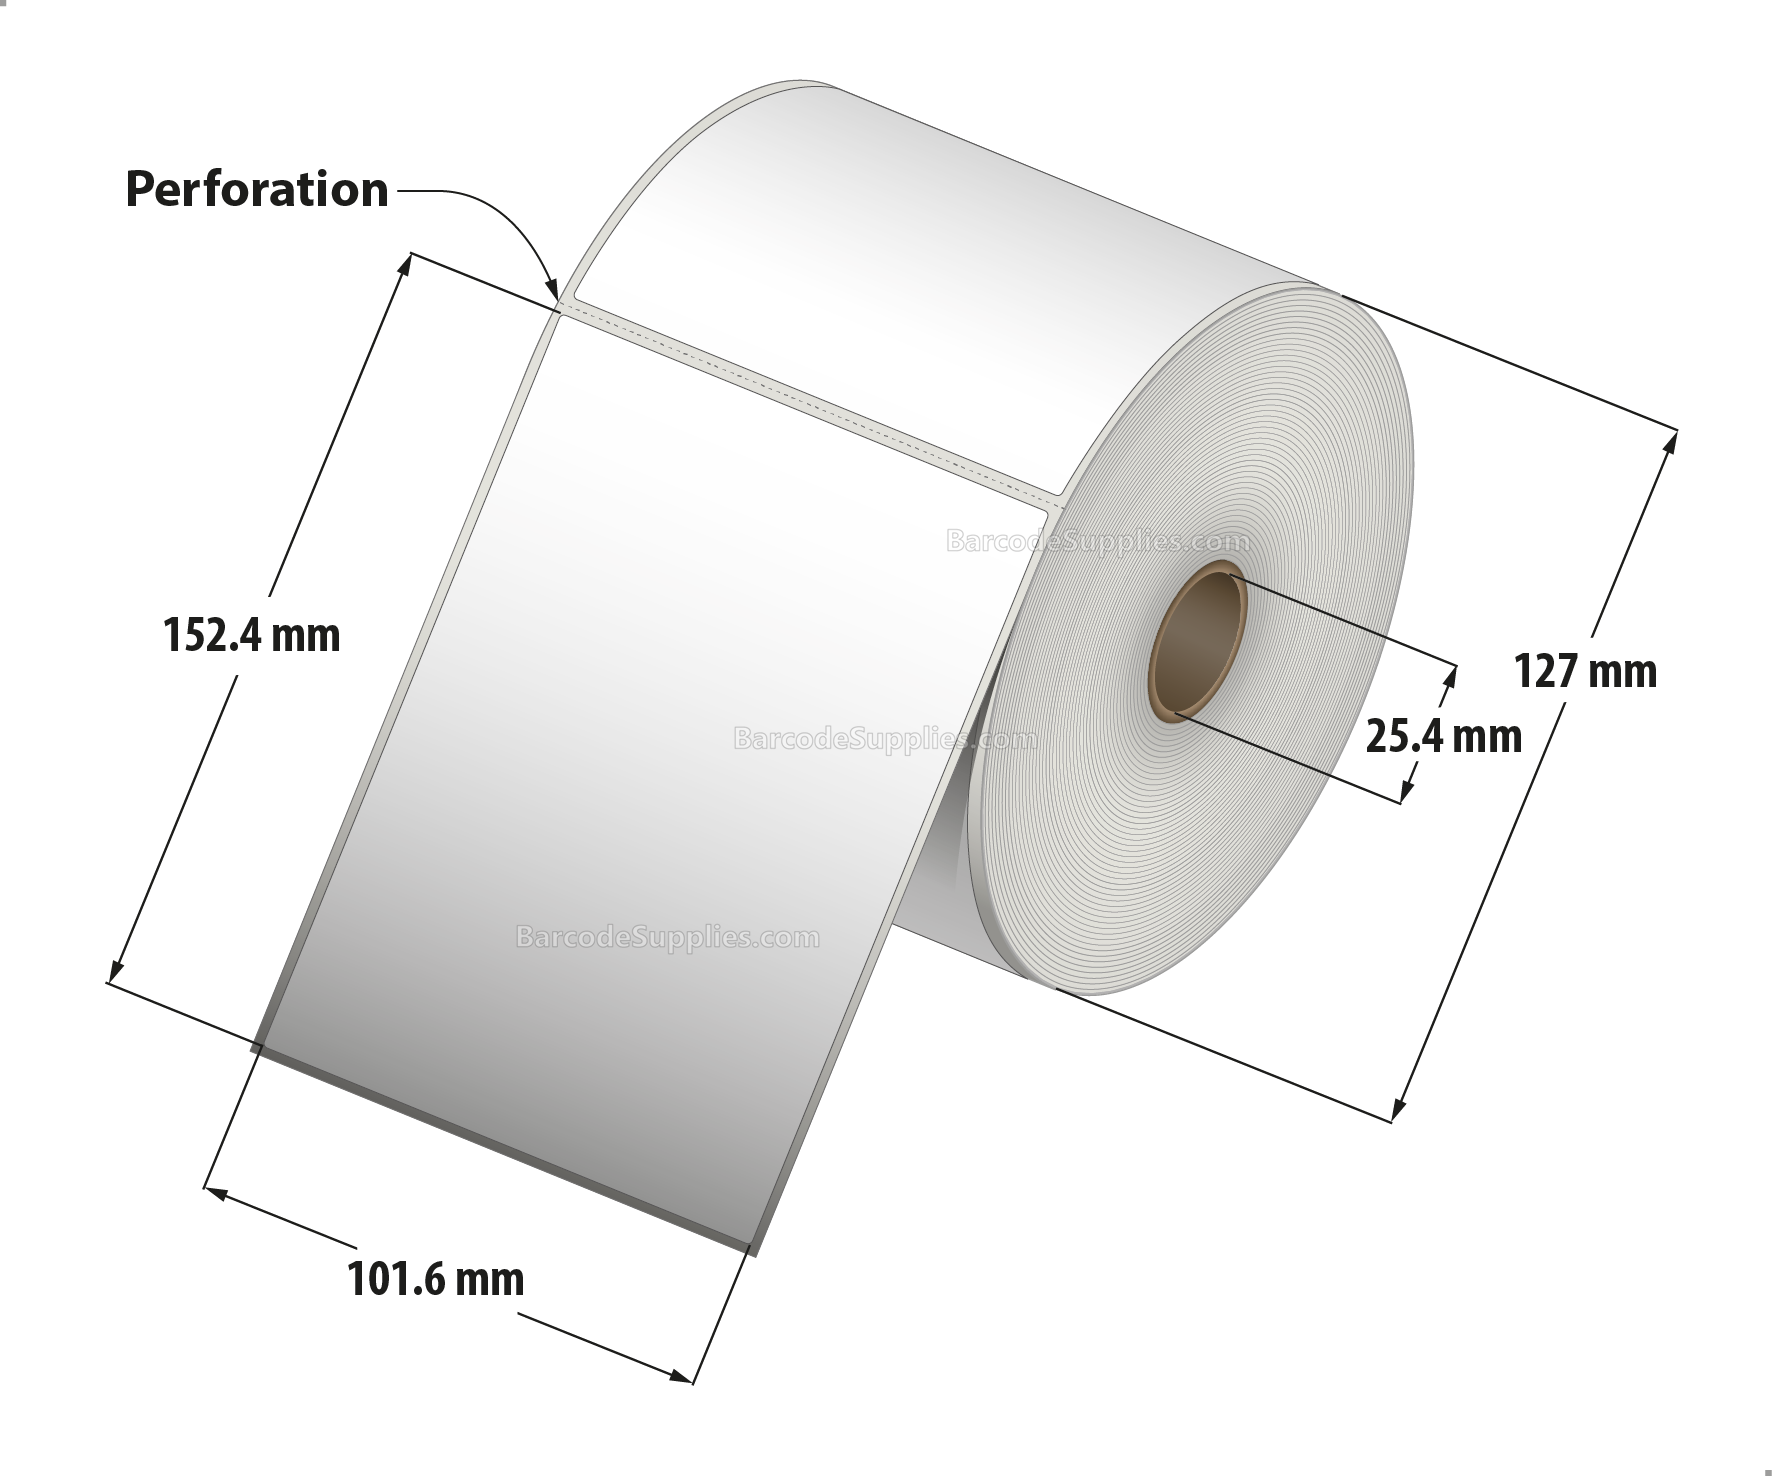 4 x 6 Thermal Transfer White Labels With Rubber Adhesive - Perforated - 475 Labels Per Roll - Carton Of 12 Rolls - 5700 Labels Total - MPN: RTT5-400600-1P